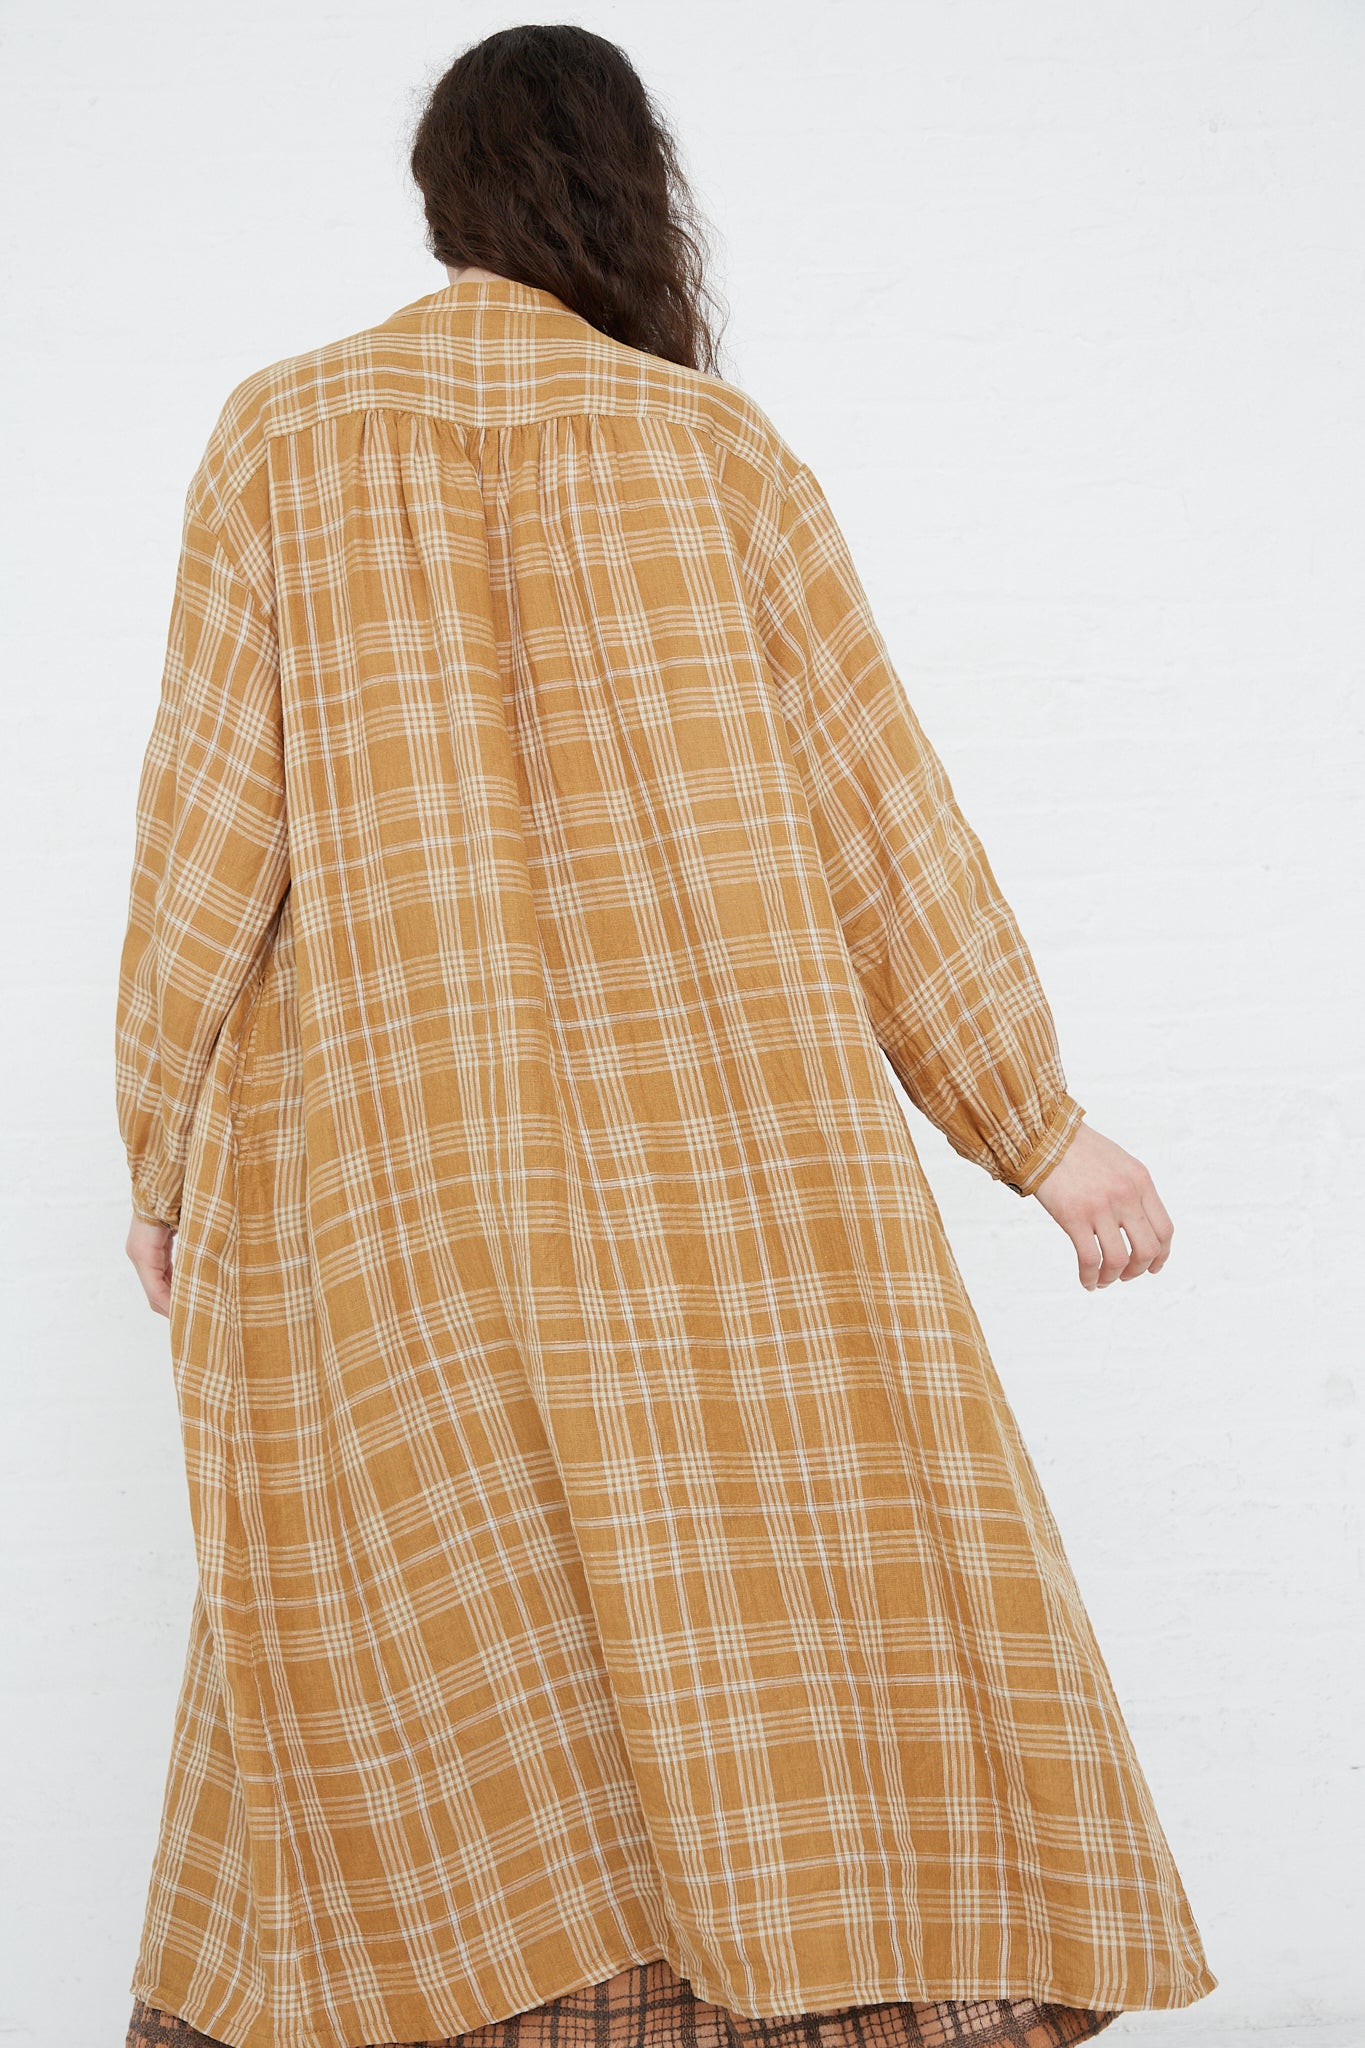 A woman wearing an Ichi Antiquités Linen Check Dress in Camel with a relaxed fit.